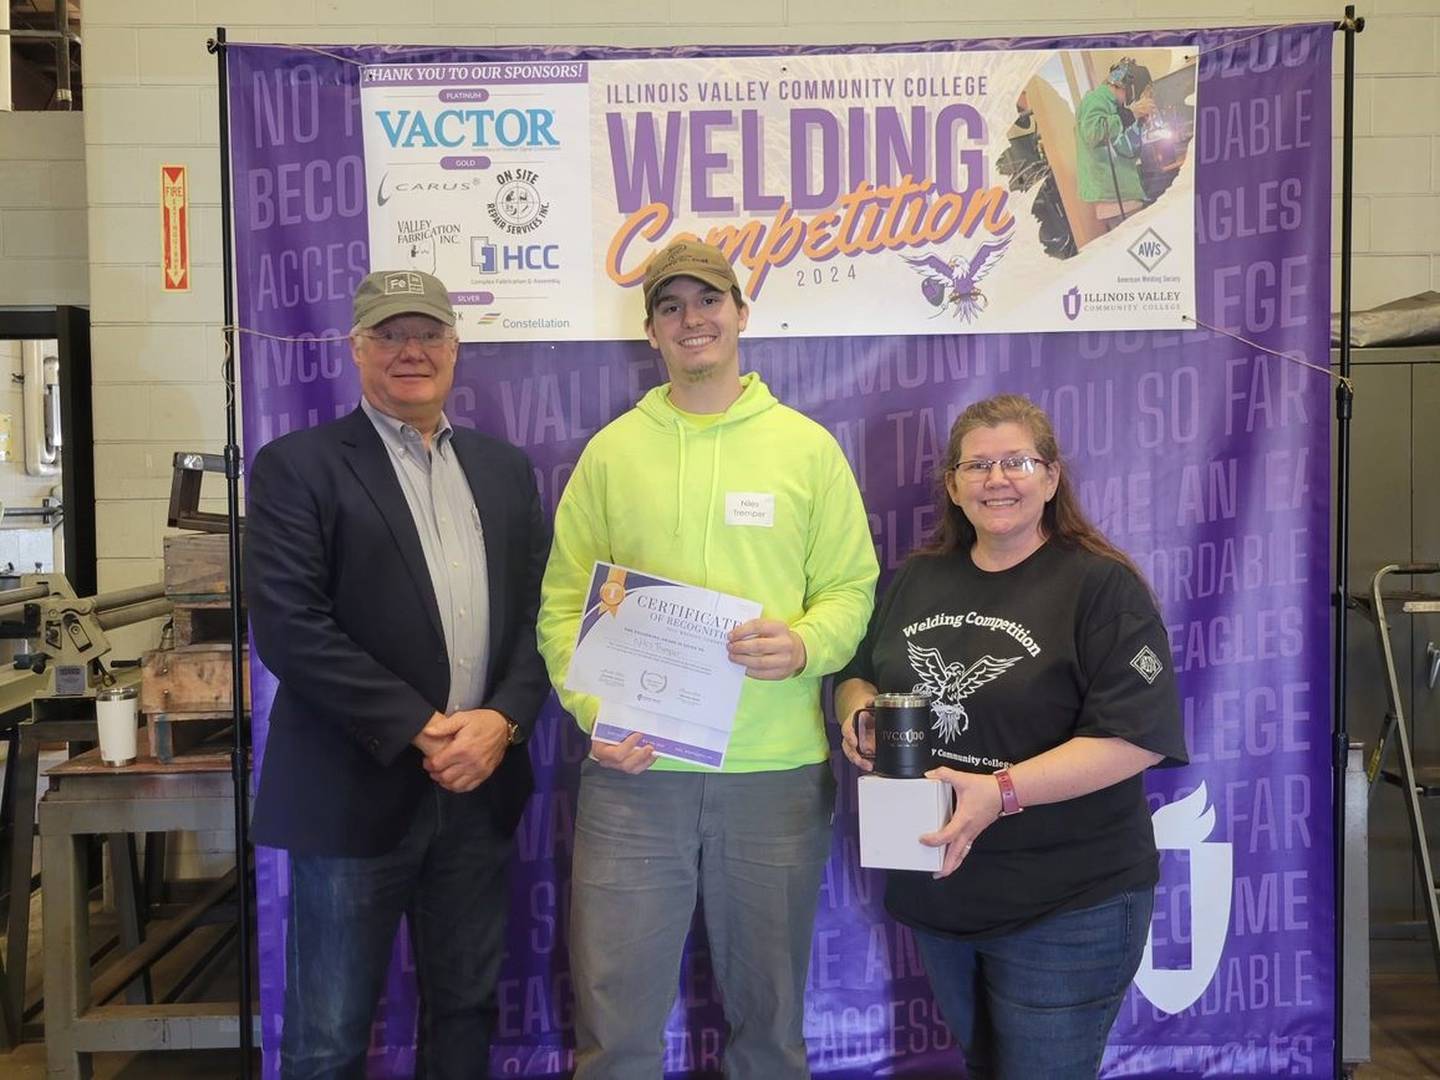 Niles Tremper, LaSalle, earned first place and prizes in the high school SMA welding division the IVCC-AWS annual welding competition. He is pictured with Theresa Molln (right) and Ron Ashelford.